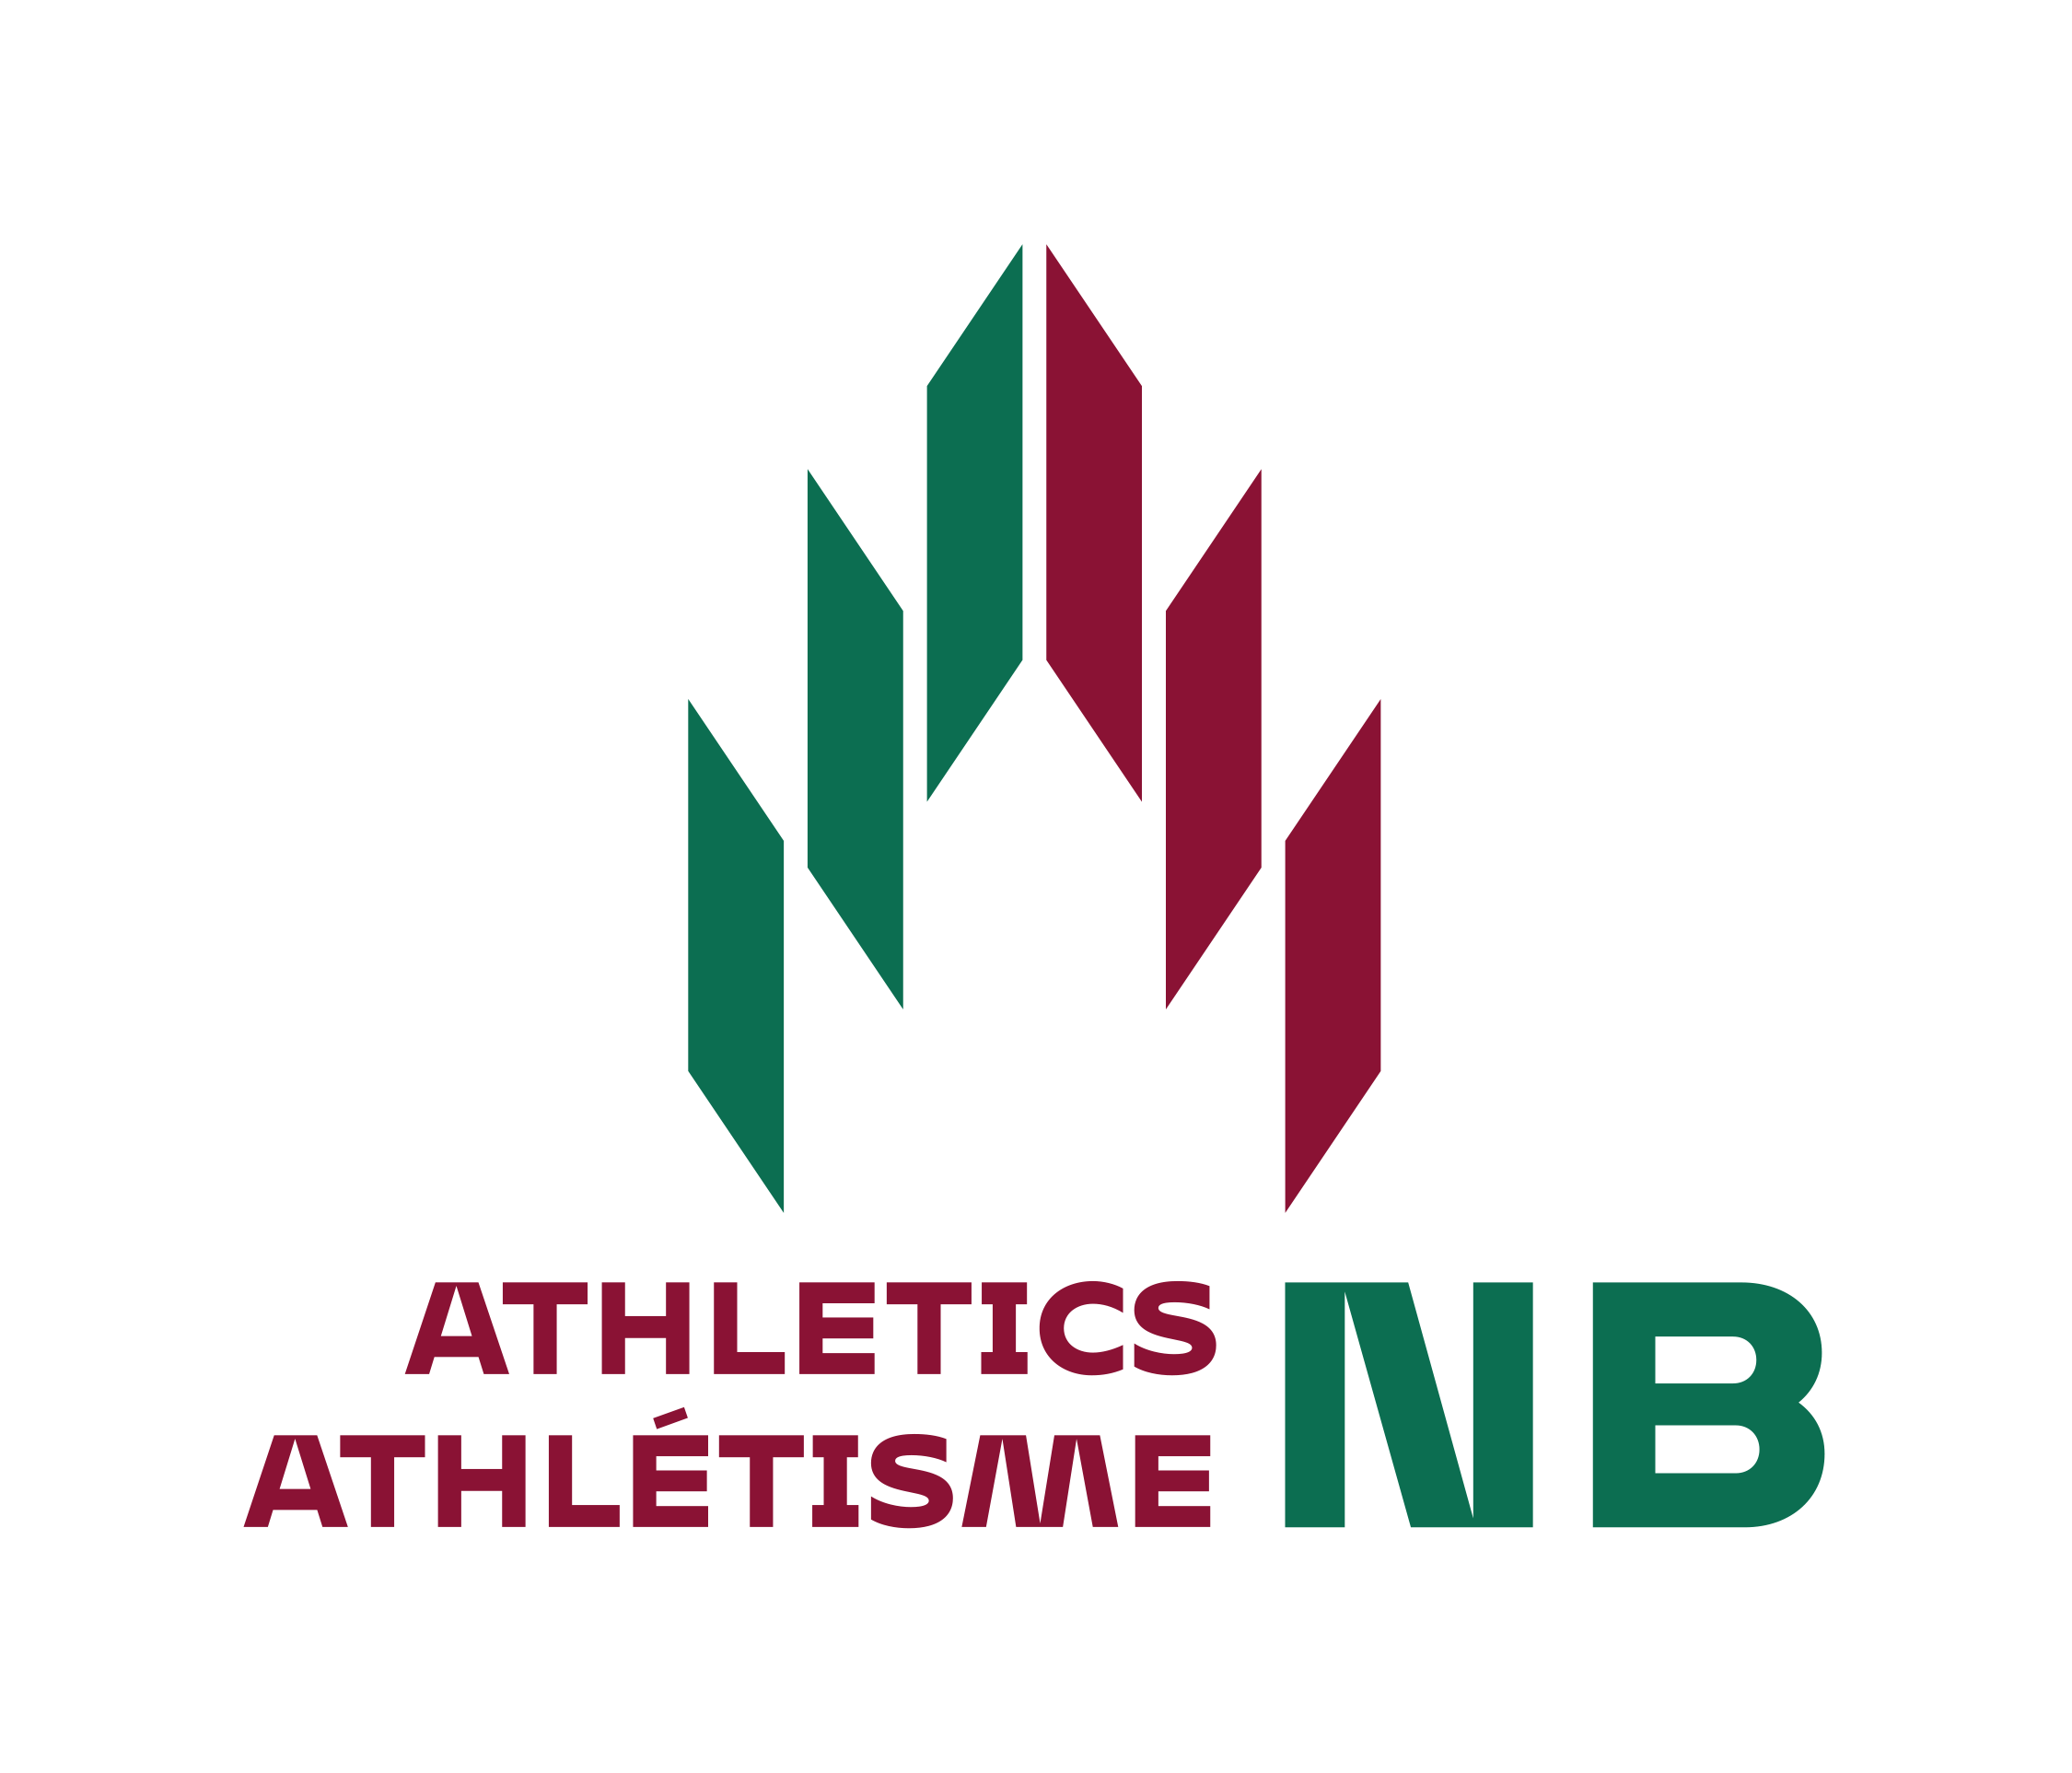 Athletics New Brunswick logo in red and green.